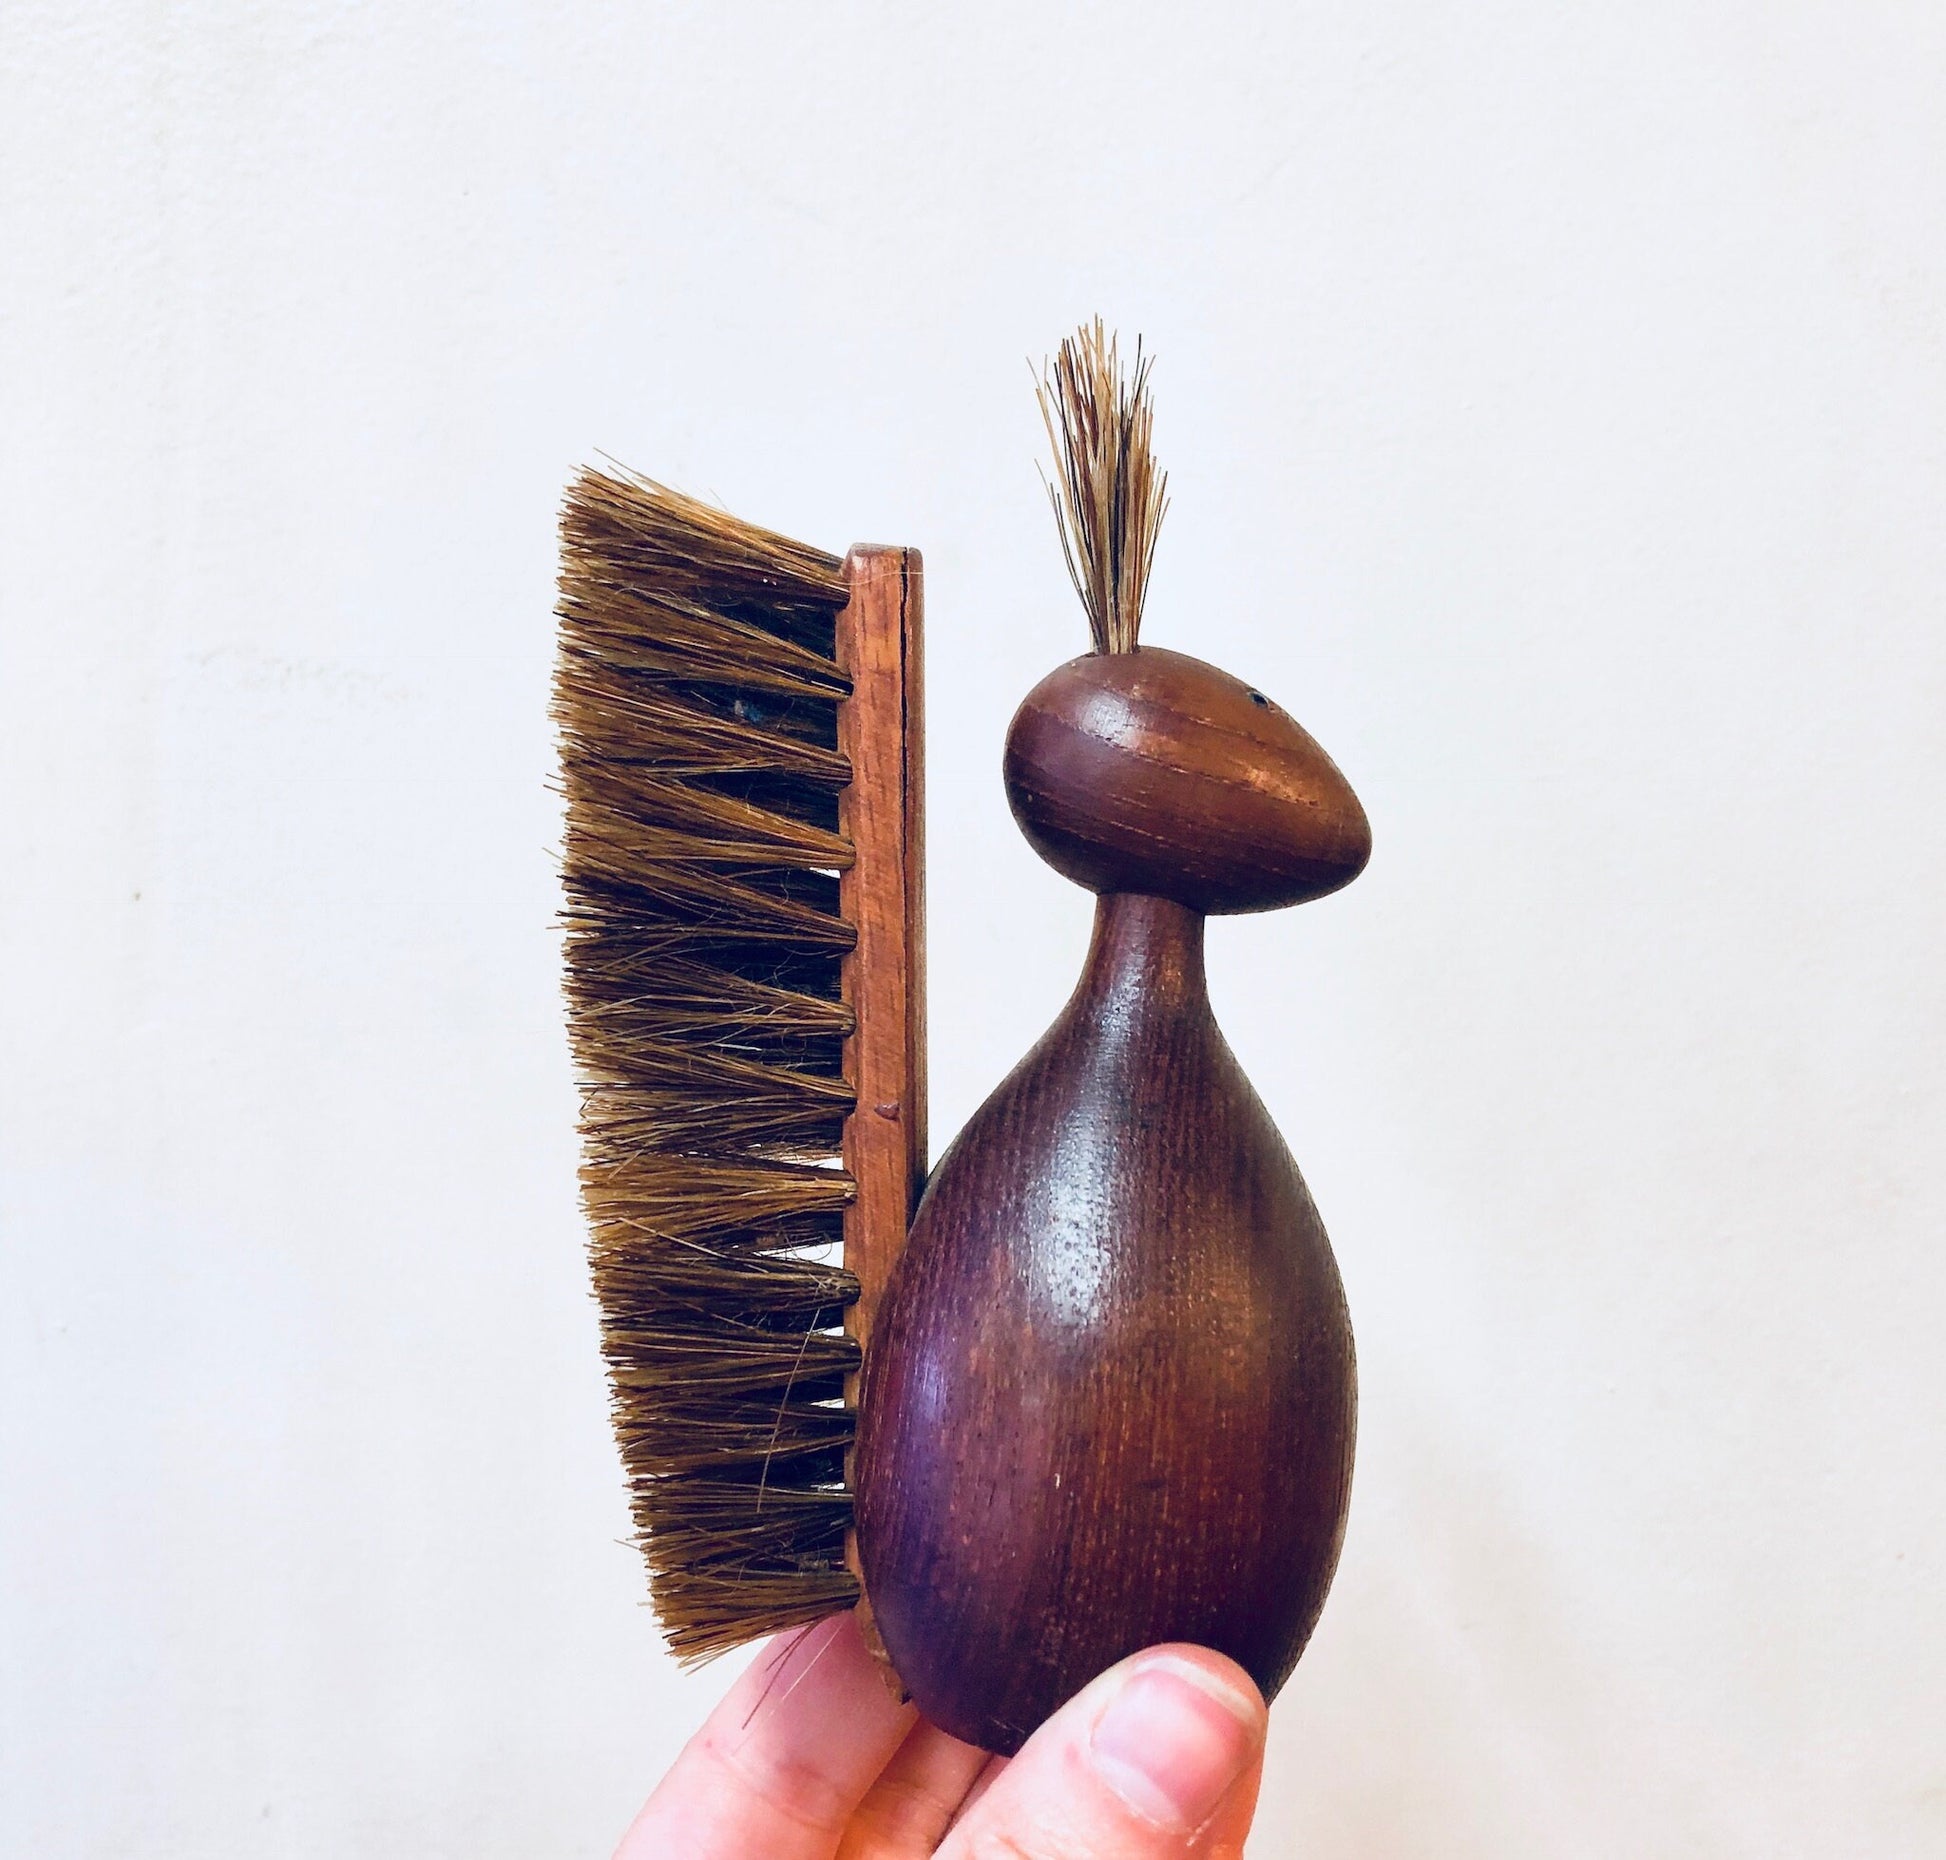 Antique wooden brush shaped like an animal, with bristles on the body and tail, held in a person's hand against a plain white background.